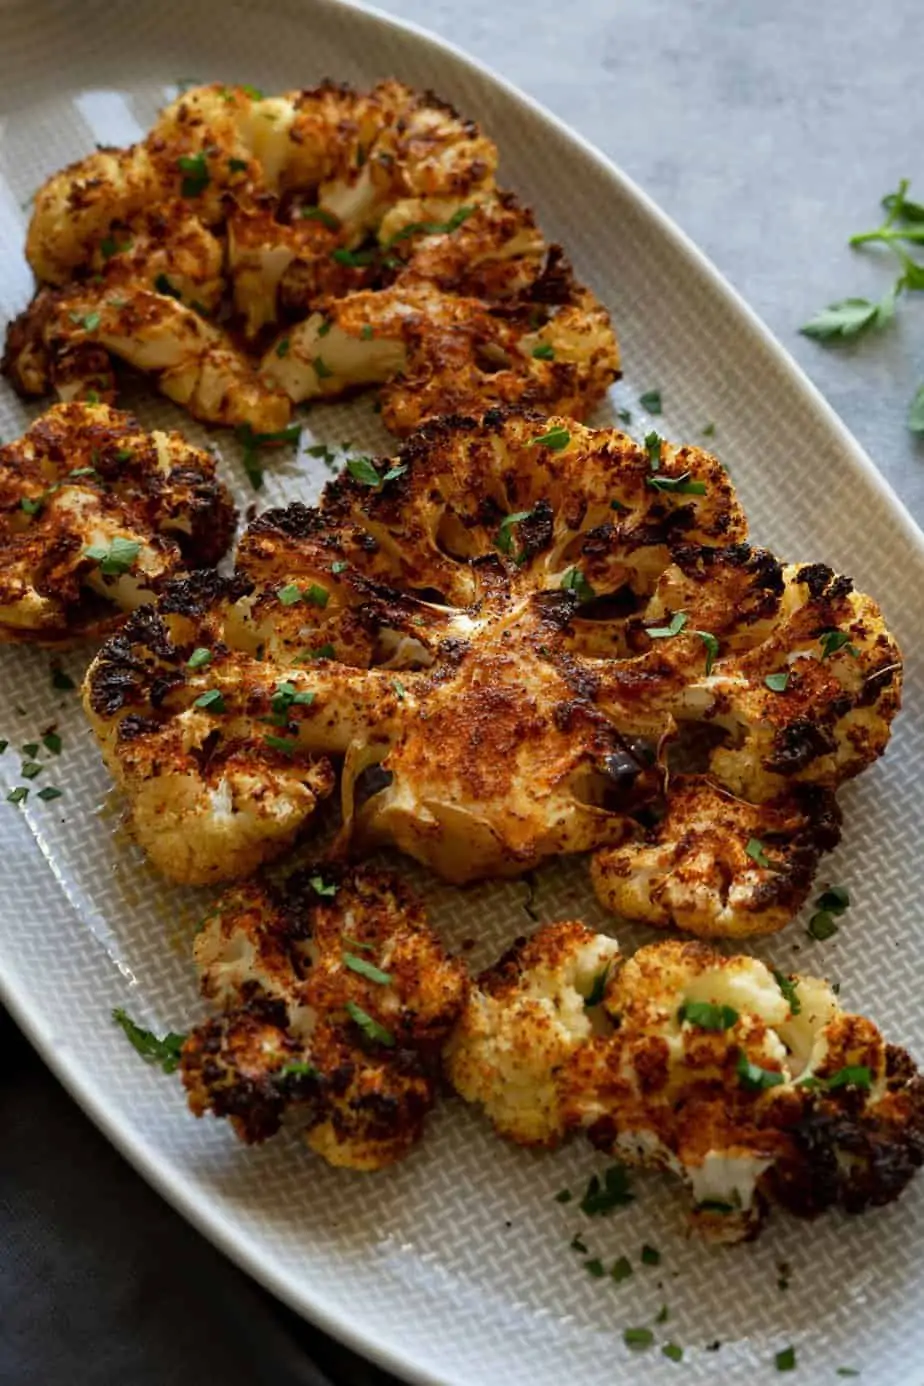 cauliflower steaks made in the air fryer with crispy edges and garnish with parsley.